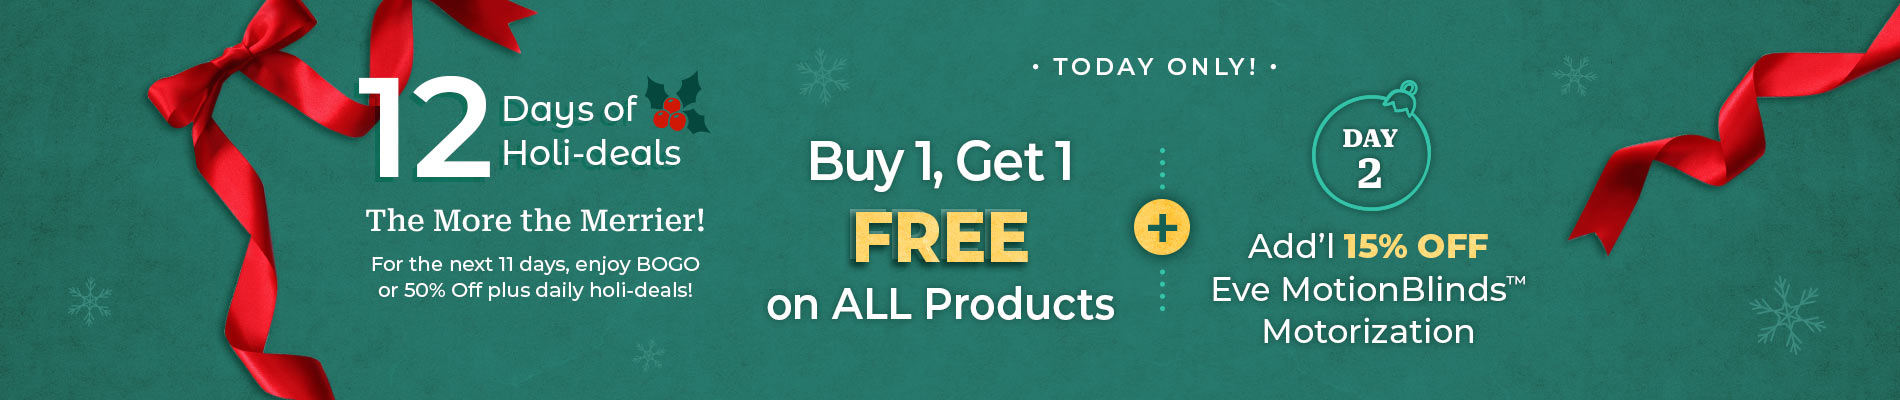 Buy 1, Get 1 FREE on All Products